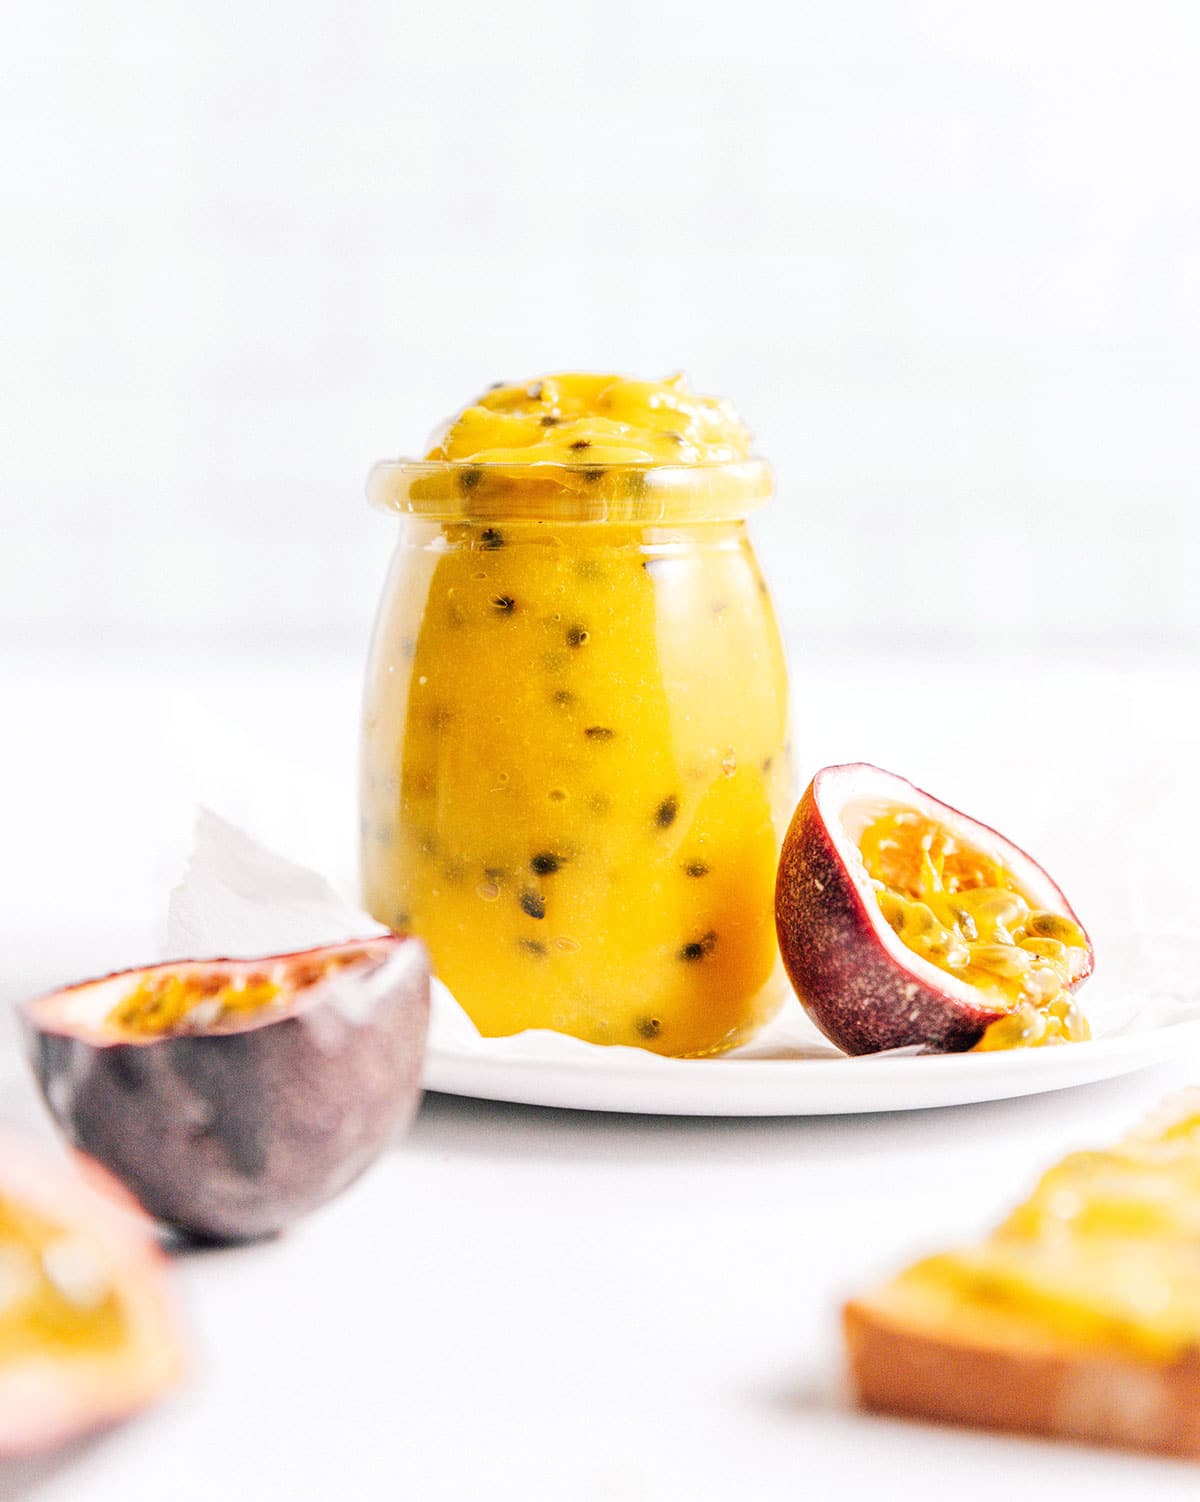 Passion fruit curd in a small glass jar next to cut open fruit.